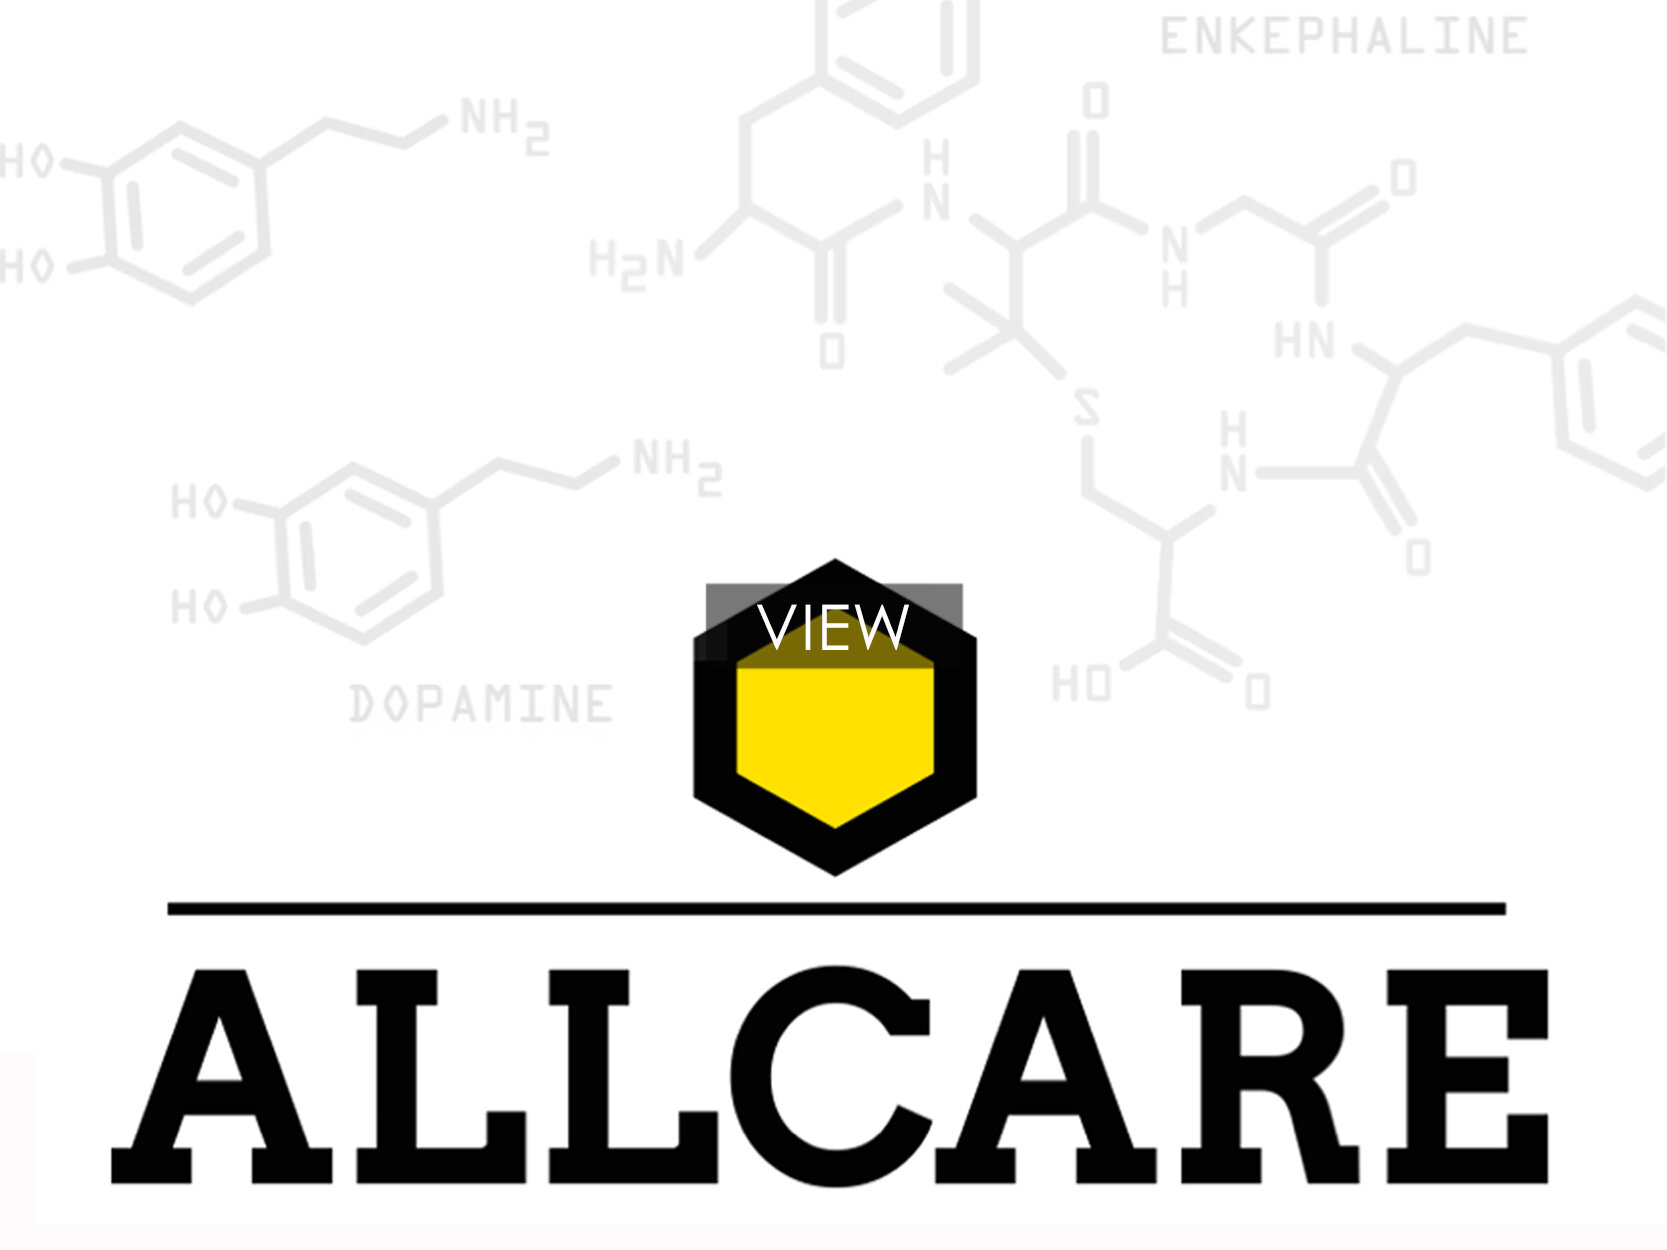 ALLCARE BRAND STRATEGY